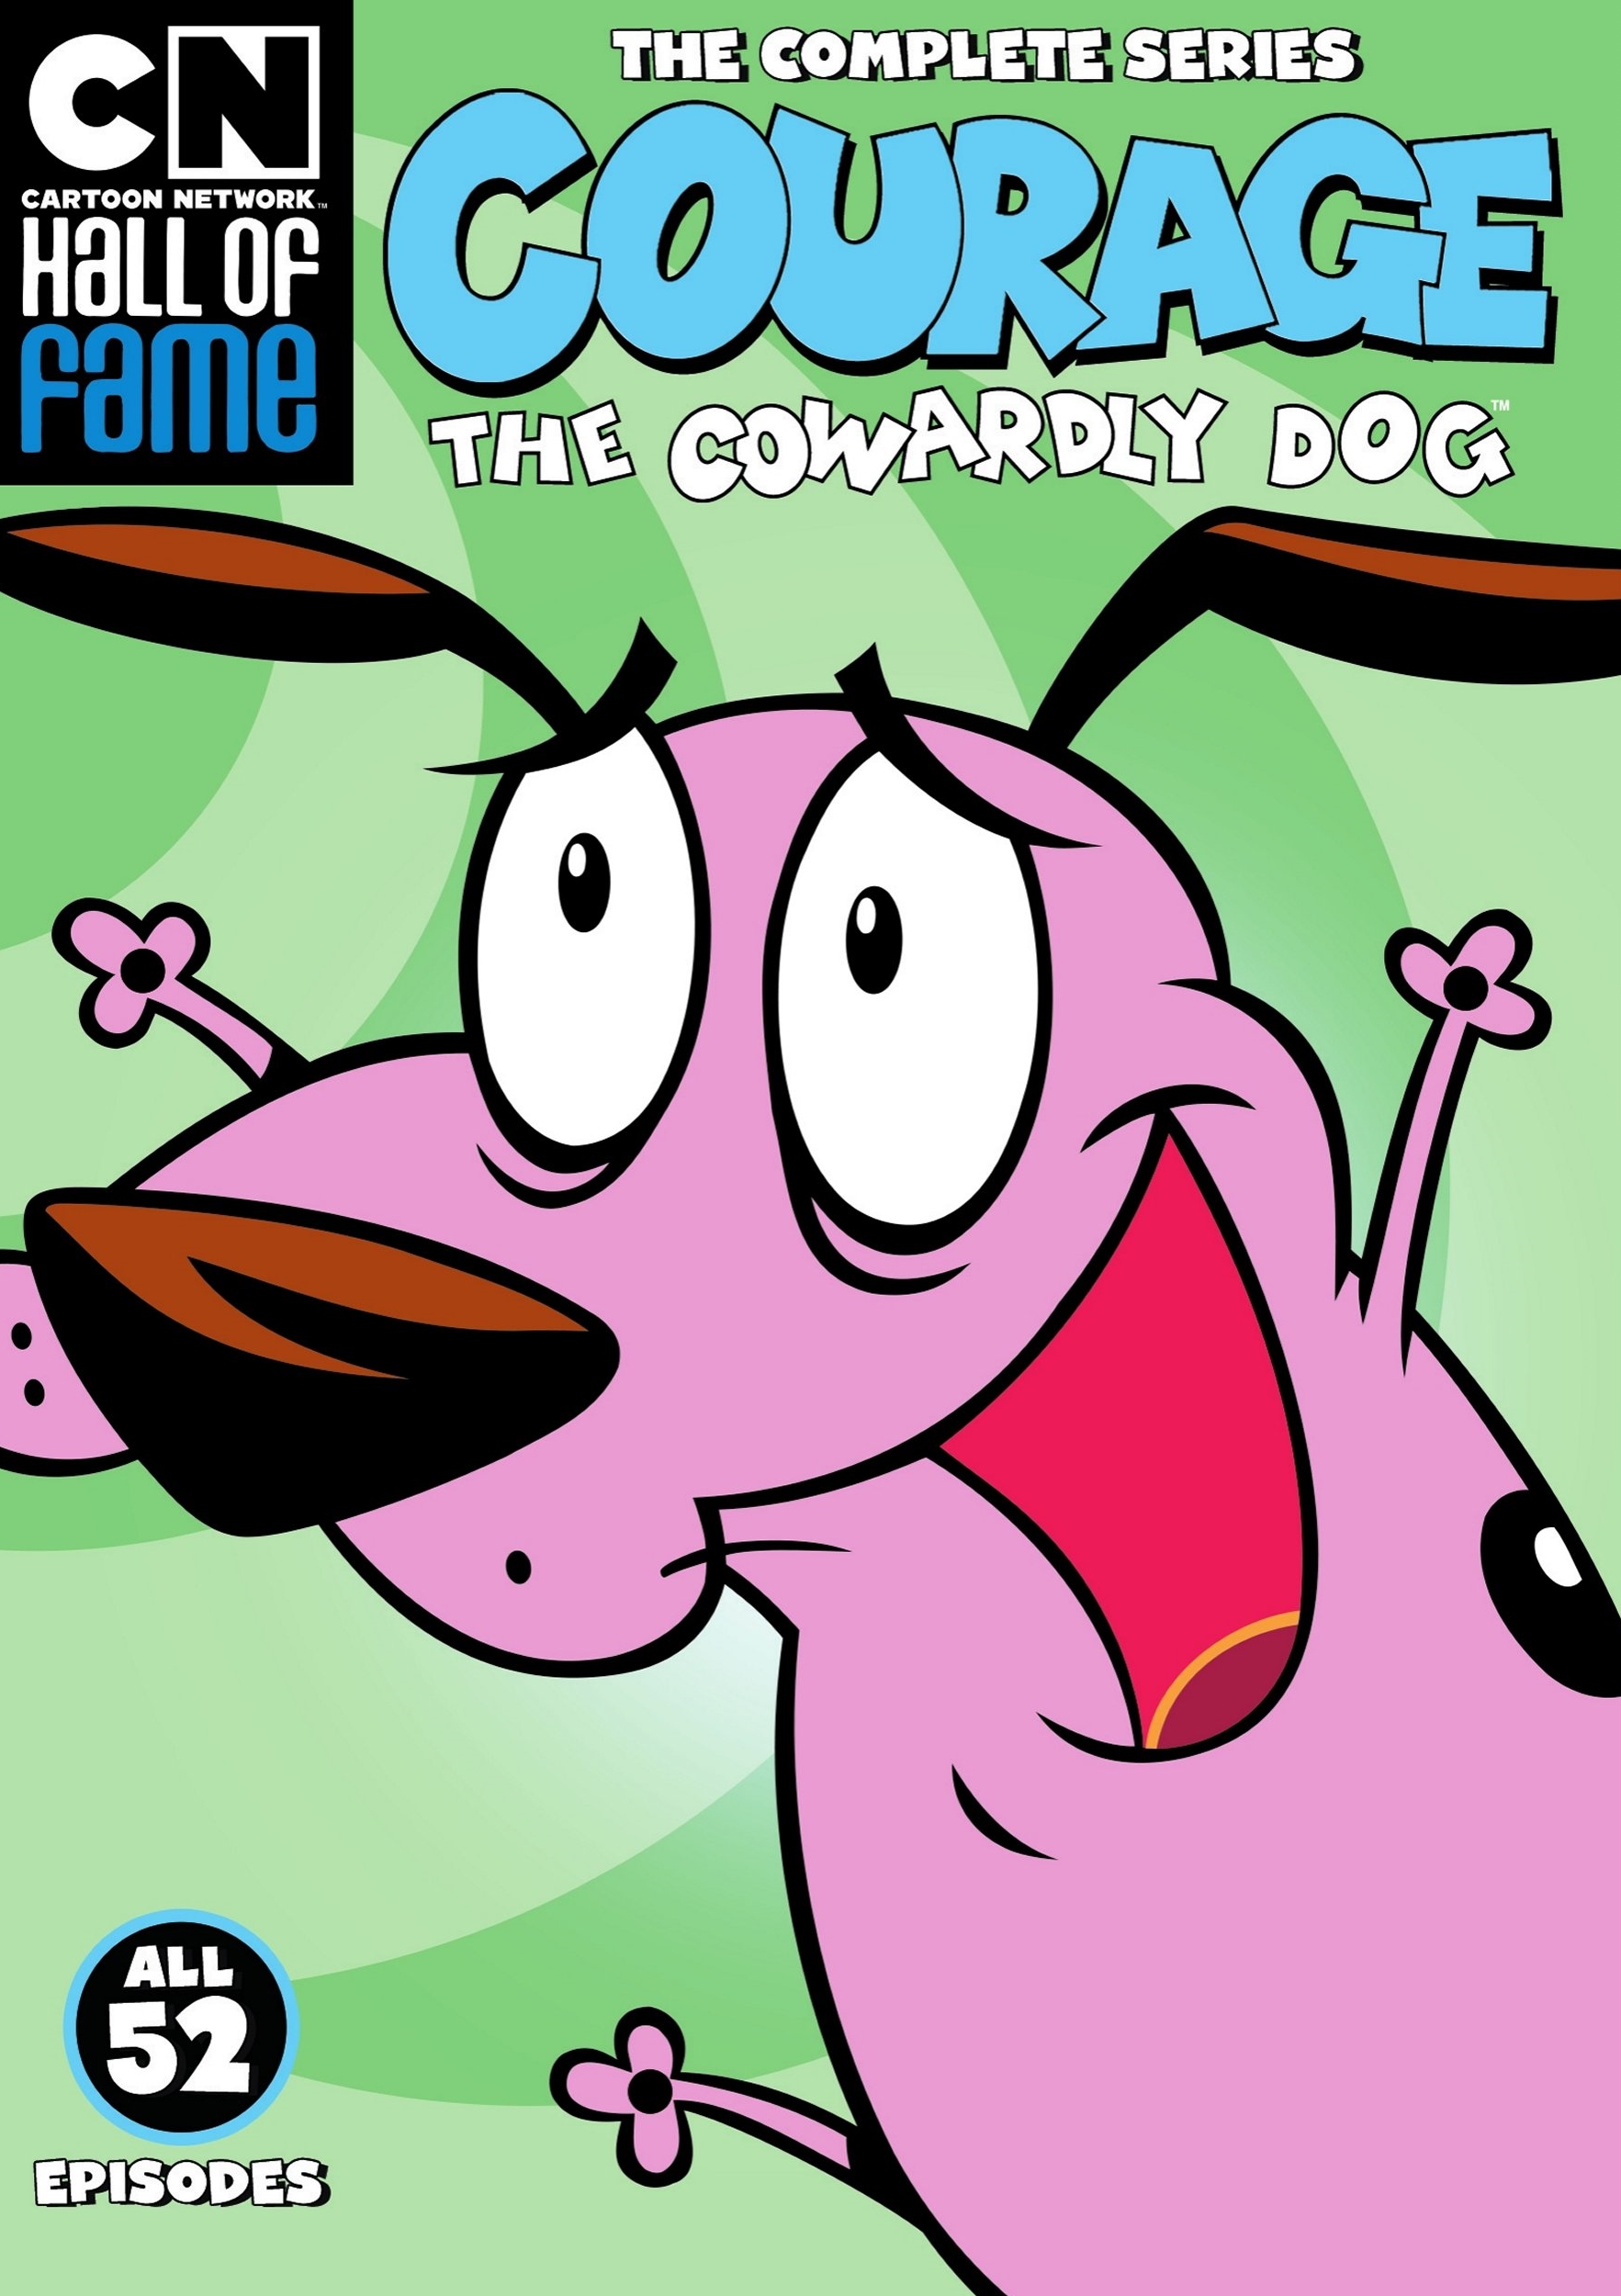 Cartoon Network Hall Of Fame: Courage The Cowardly Dog The Complete ...